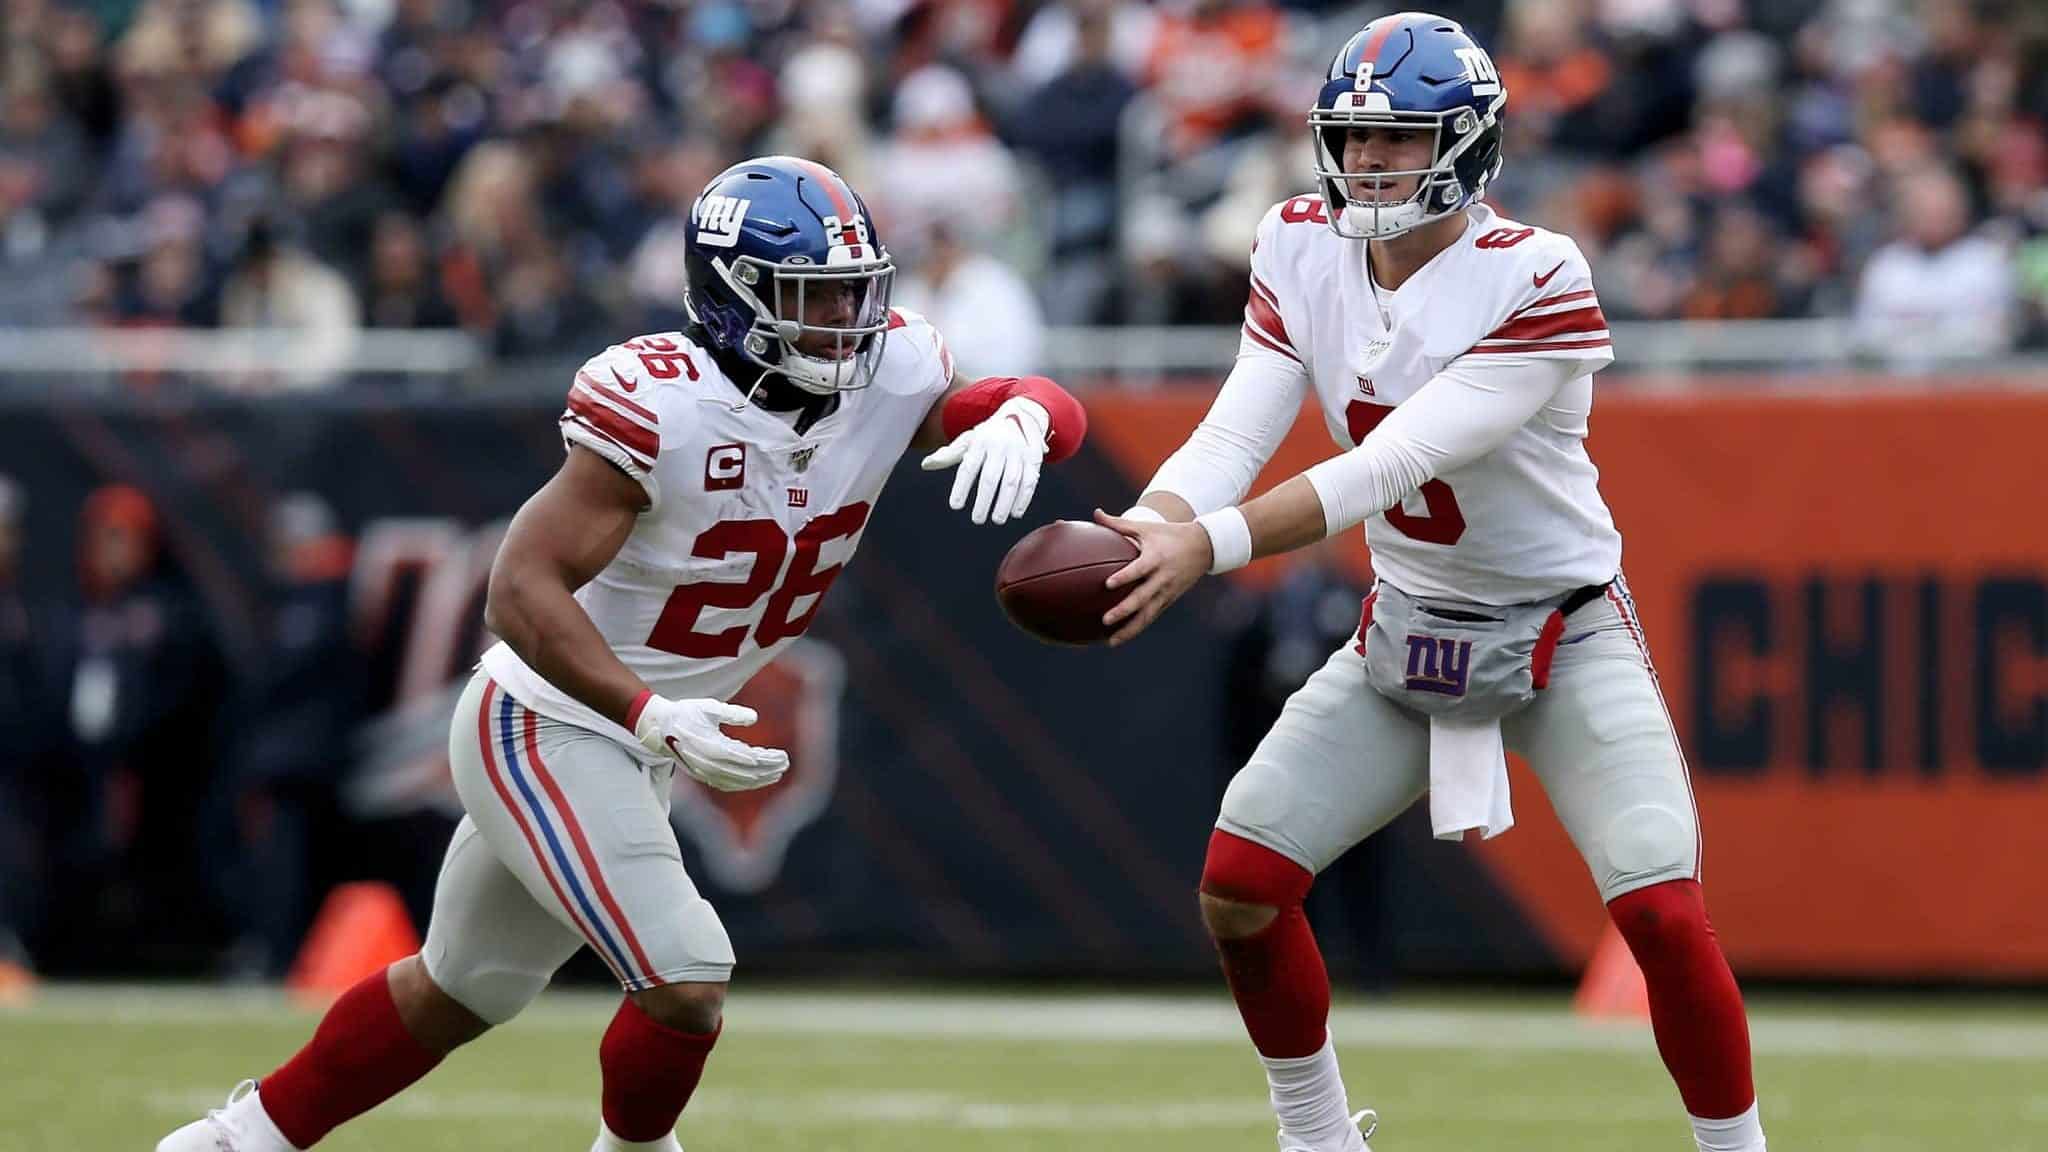 CHICAGO, ILLINOIS - NOVEMBER 24: Daniel Jones #8 of the New York Giants hands the ball off to Saquon Barkley #26 in the second quarter against the Chicago Bears at Soldier Field on November 24, 2019 in Chicago, Illinois.